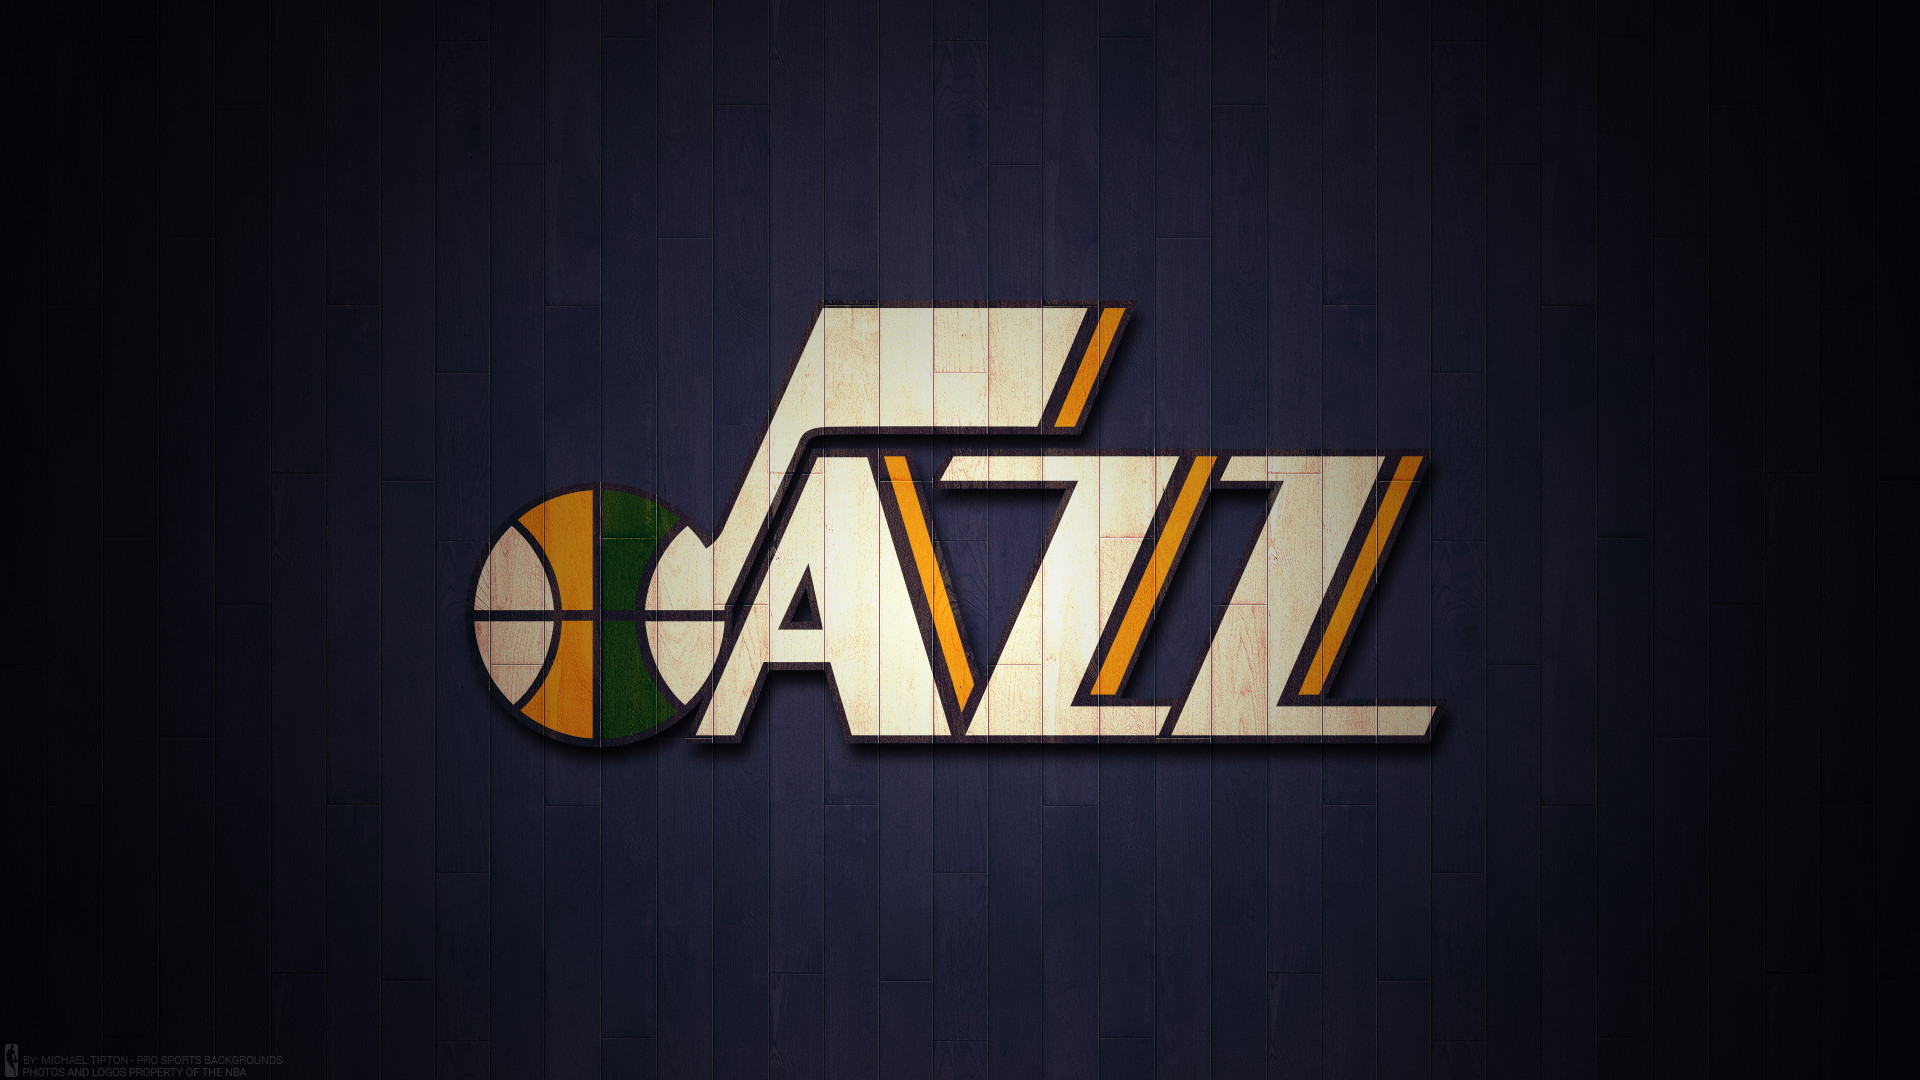 Wallpapers HD Utah Jazz with high-resolution 1920x1080 pixel. You can use this wallpaper for your Desktop Computer Backgrounds, Windows or Mac Screensavers, iPhone Lock screen, Tablet or Android and another Mobile Phone device